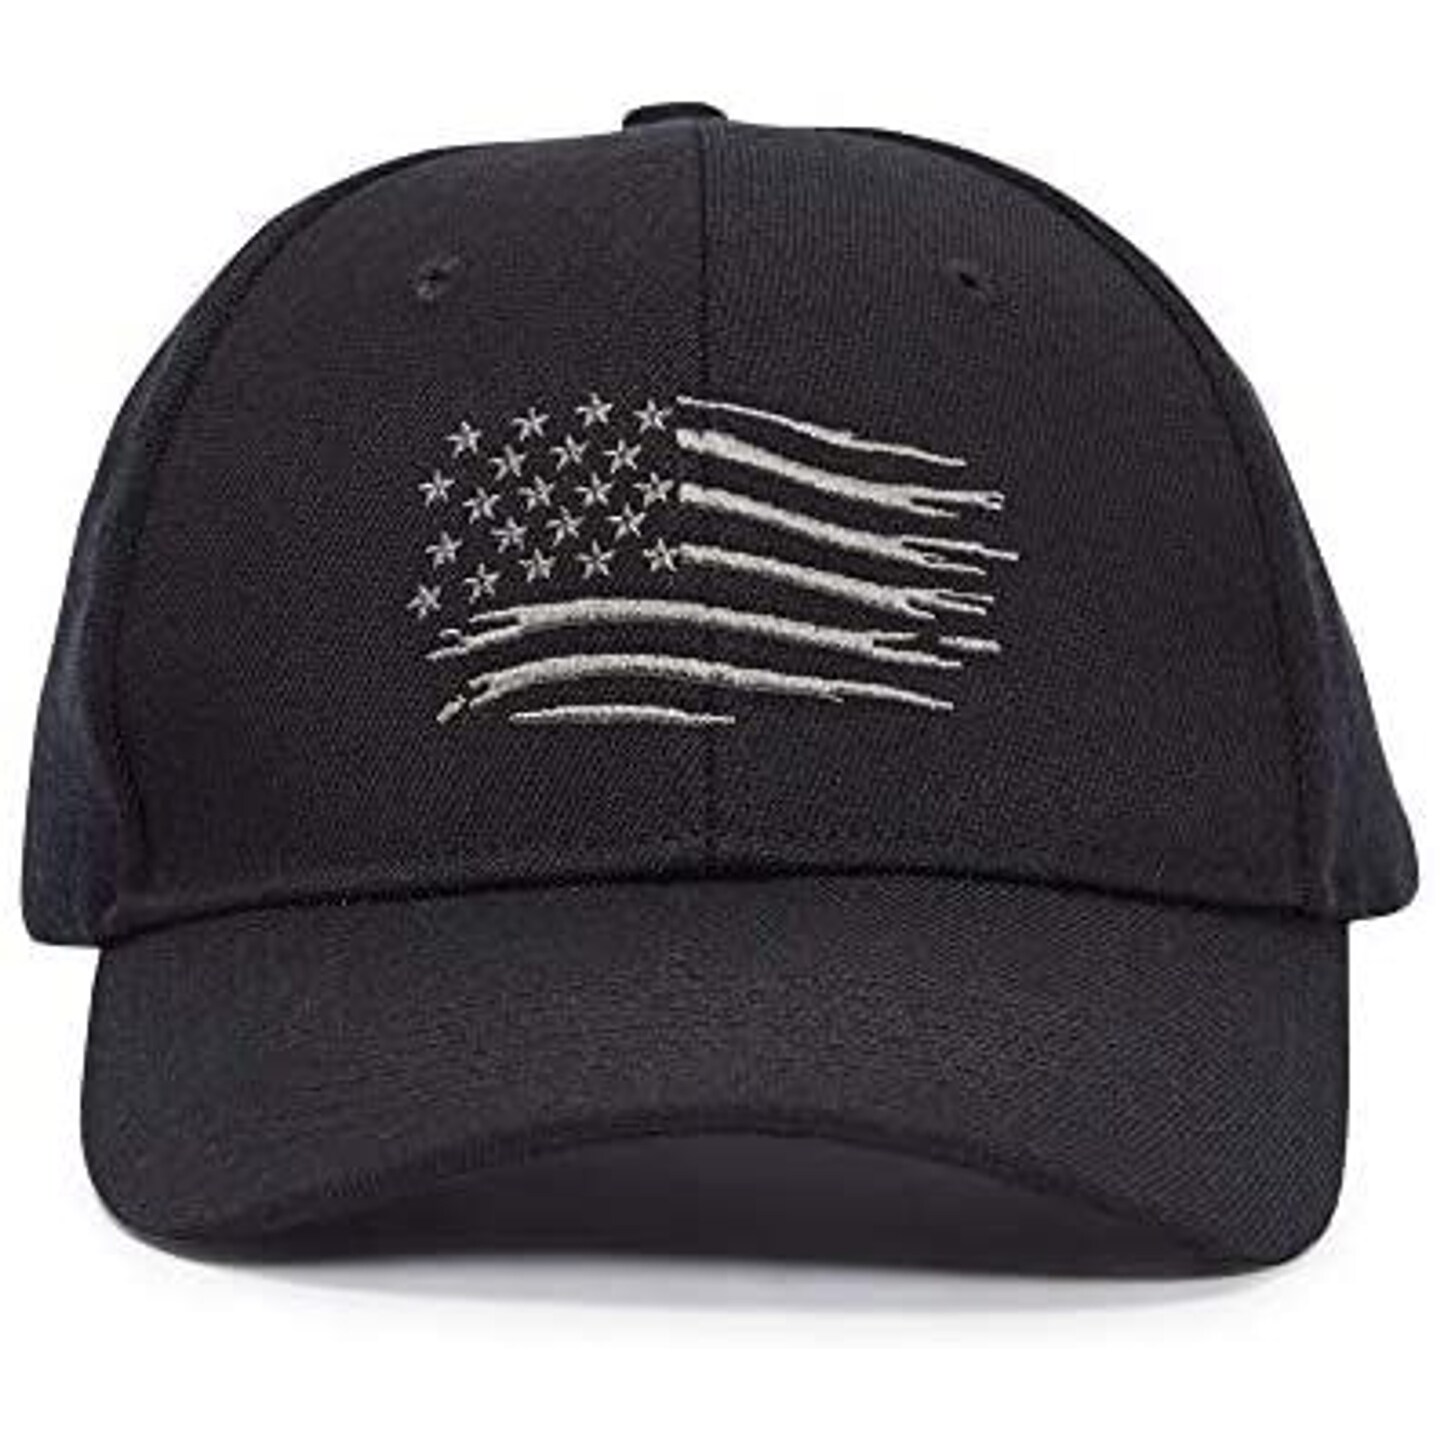 Black American Flag Hat for Men with Inner Crown Elastic Band, One Size Fits Most